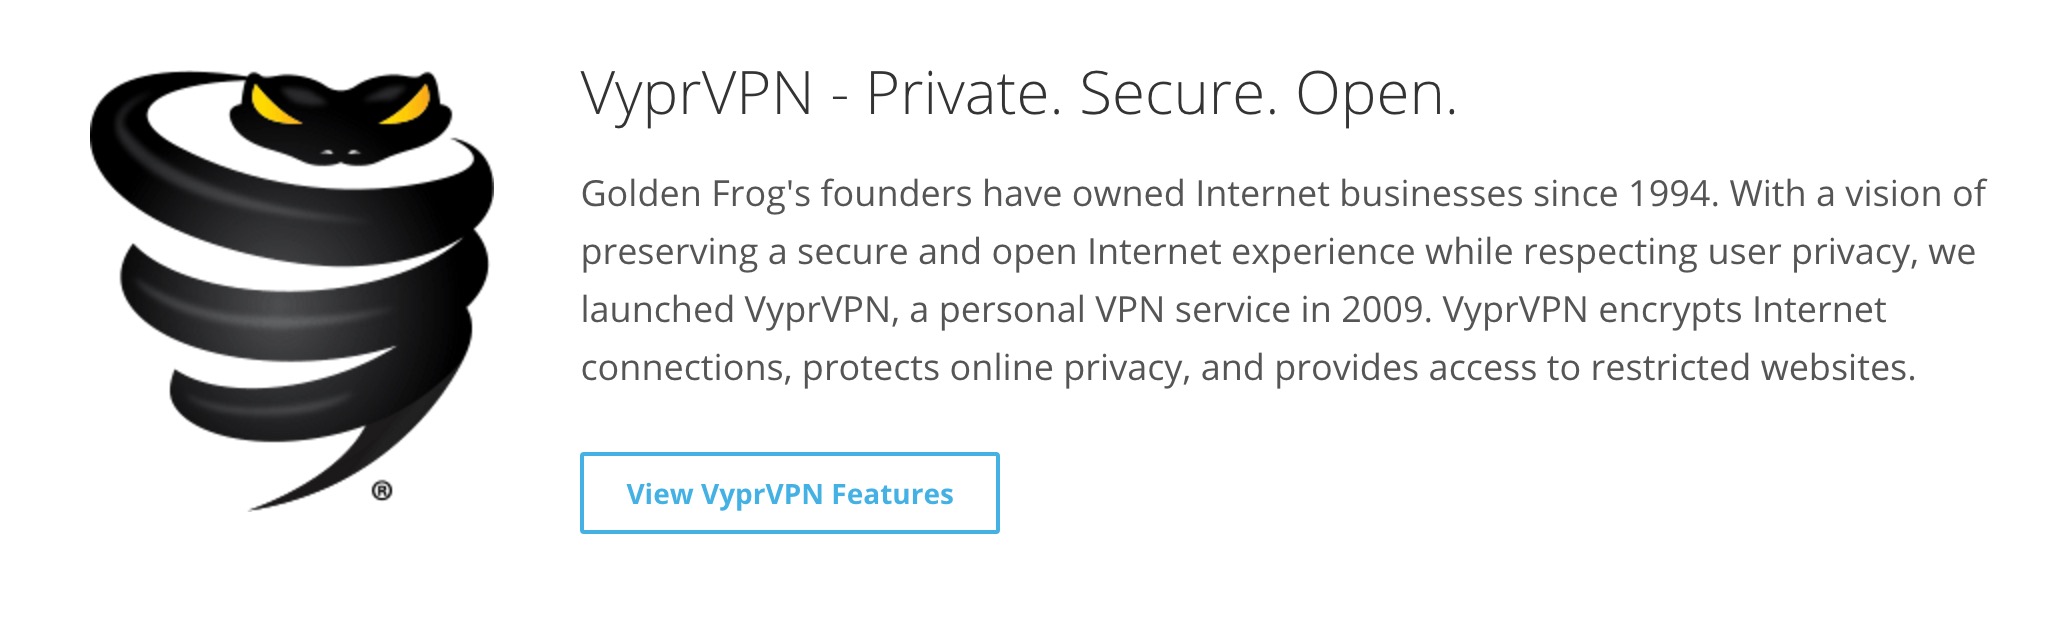 Speed and performance vyprvpn